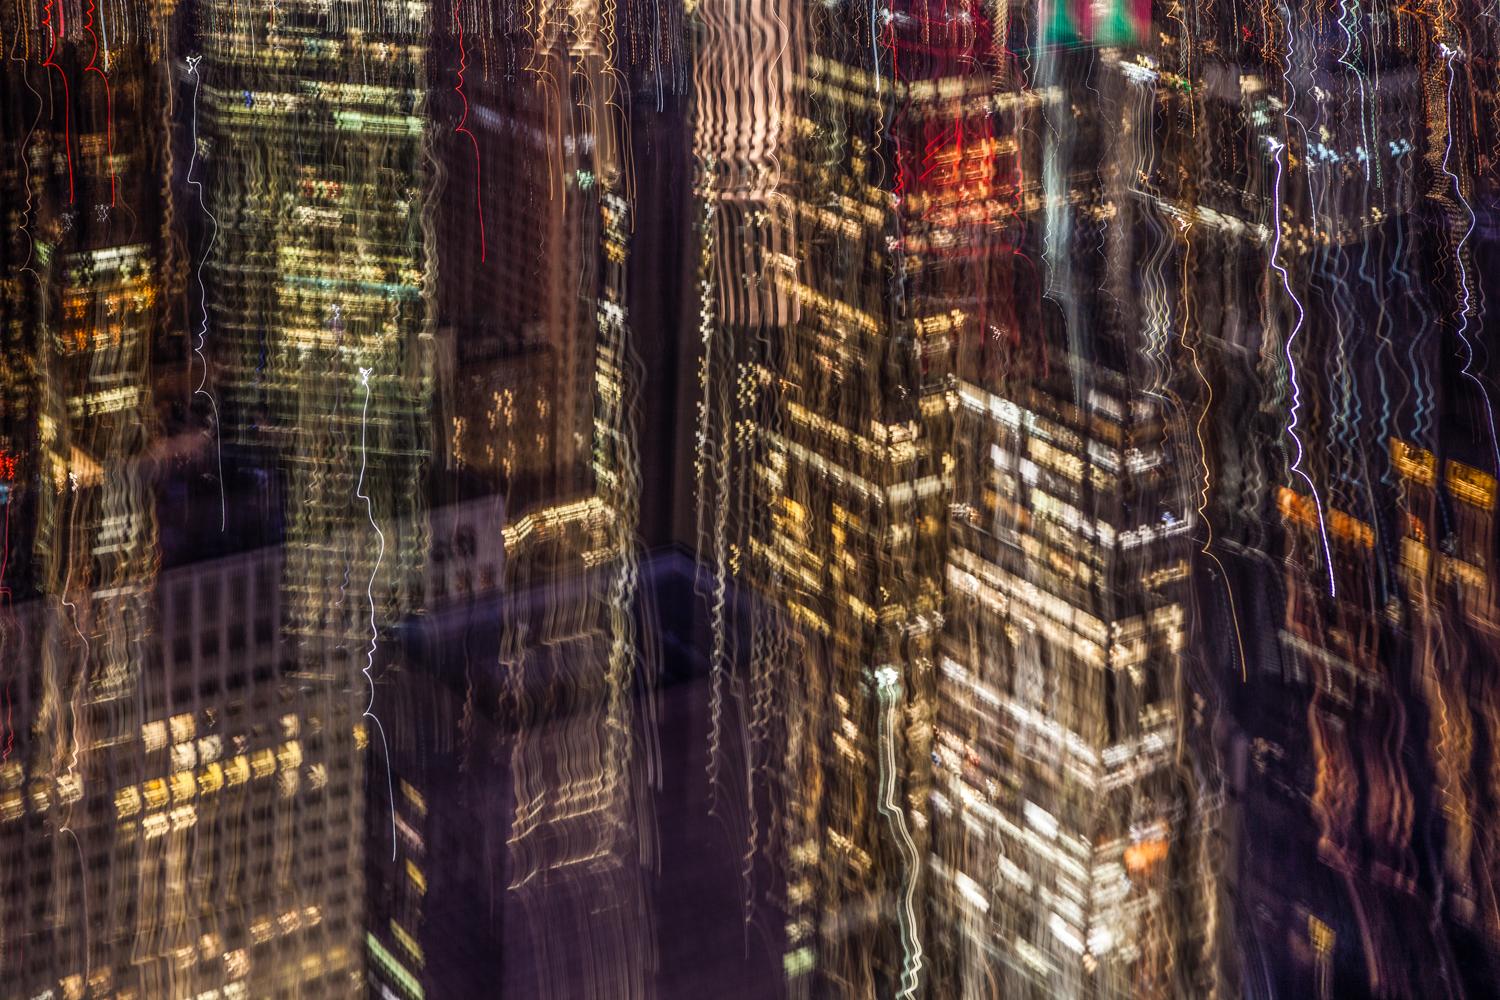 New York Dream 24 is a photograph by French contemporary artist Xavier Dumoulin. 

This photograph is sold unframed as a print only. It is available in 2 dimensions:
*60 cm × 90 cm (23.6" × 35.4"), edition of 8 copies
*80 cm × 120 cm (31.5" ×